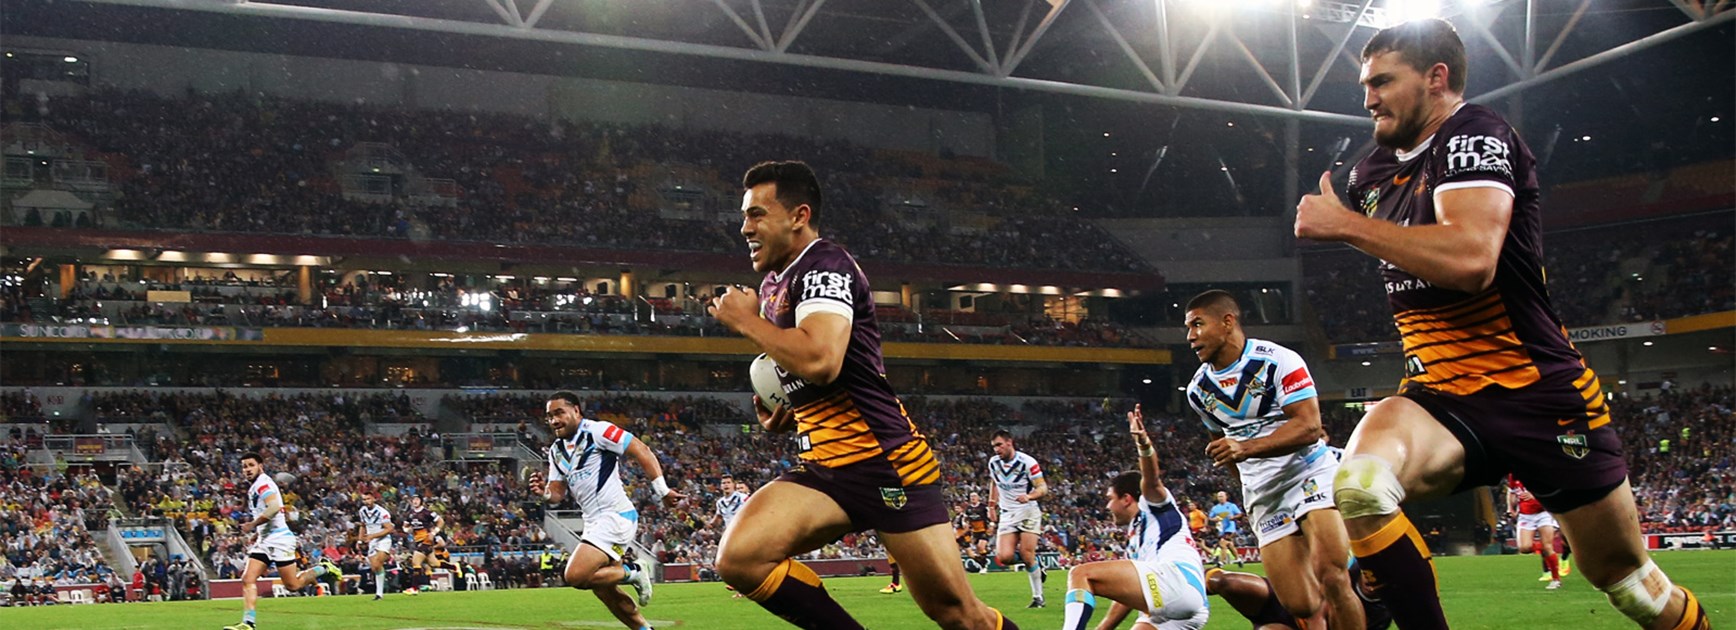 Jordan Kahu breaks clear for the Broncos against the Titans on Friday night.